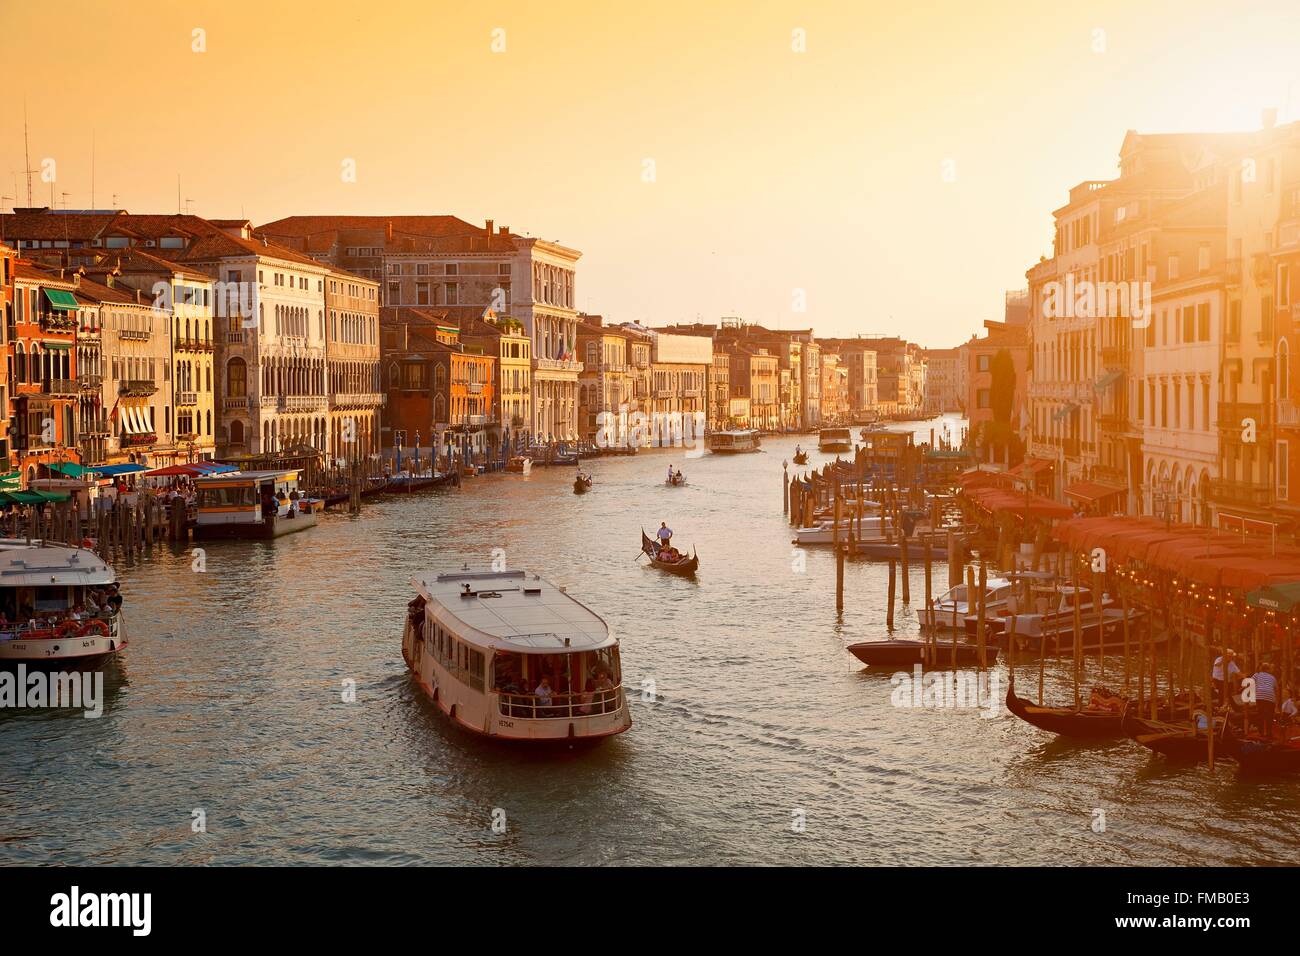 Rialto Bridge On The Grand Canal In Venice Italy In The Evening On Sunset  Toned Square Image Romantic Sights Of Venice In Italy Stock Photo -  Download Image Now - iStock